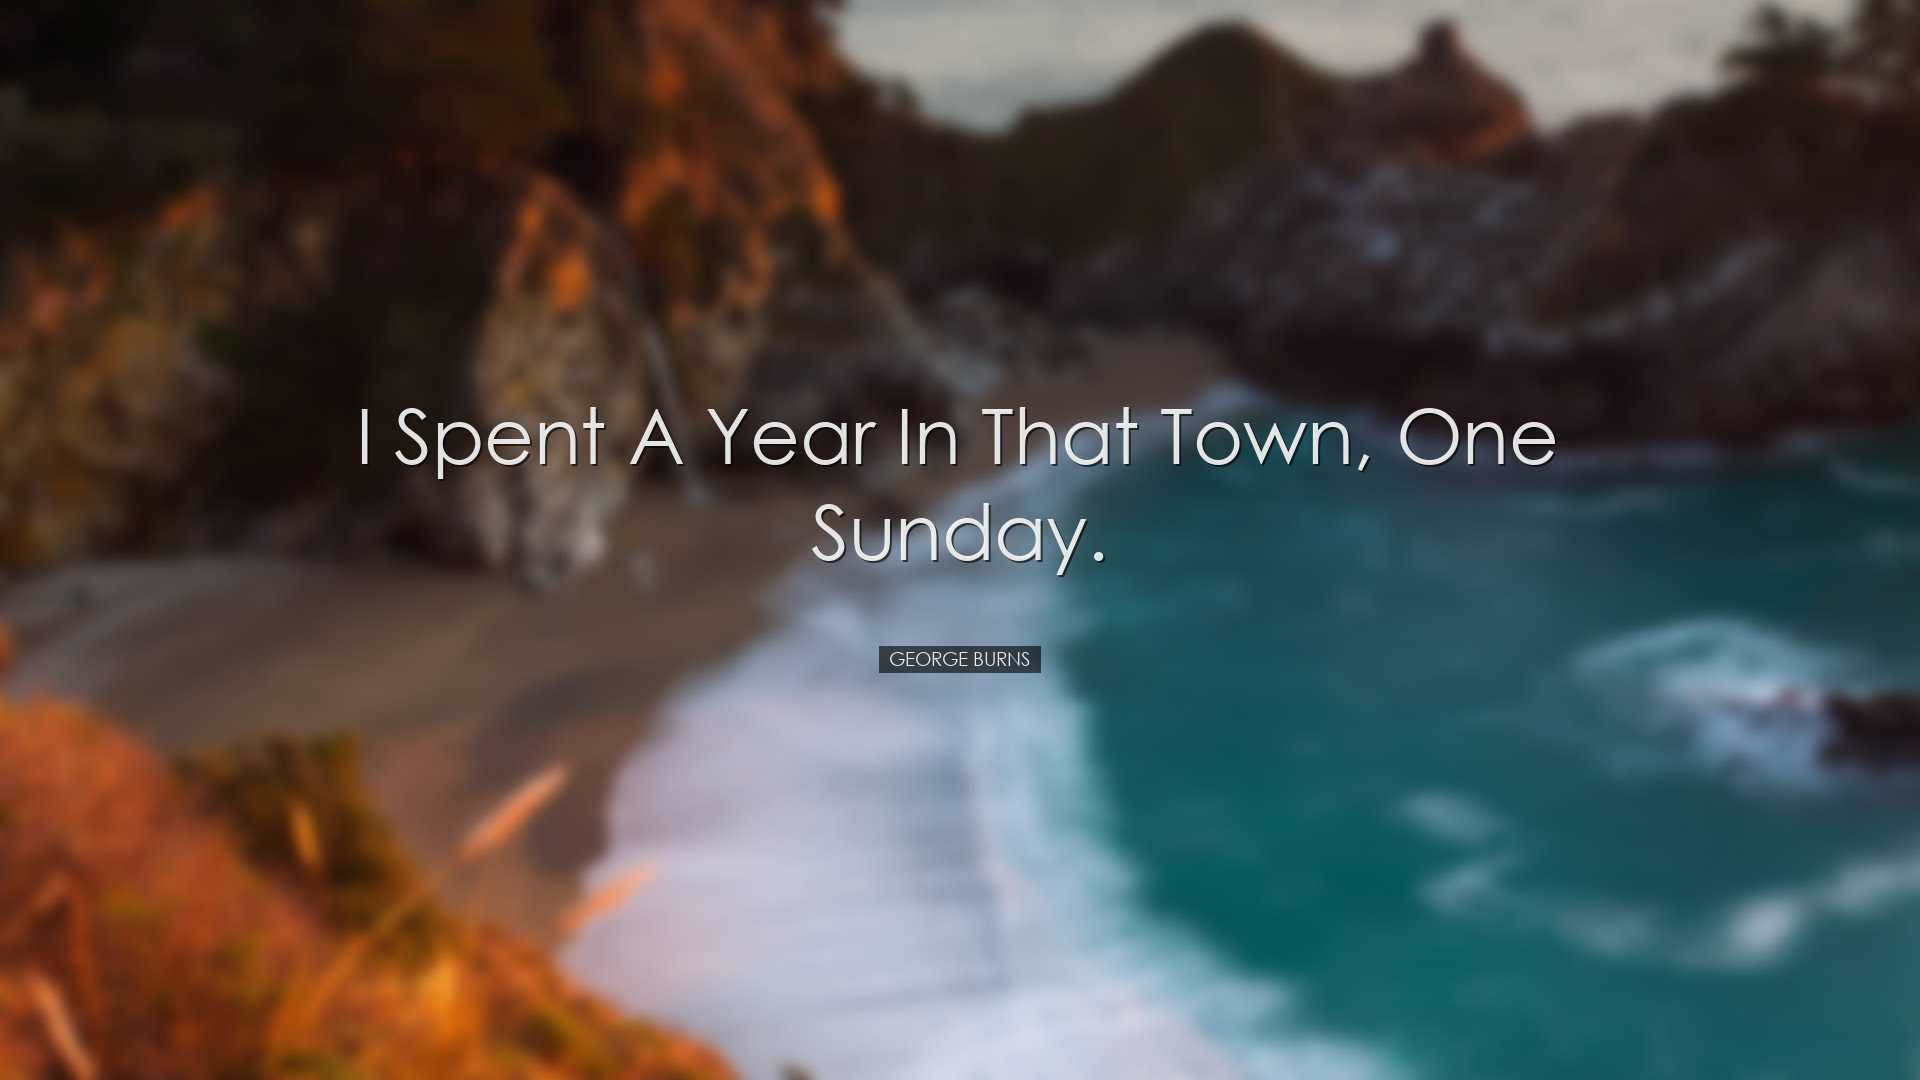 I spent a year in that town, one Sunday. - George Burns